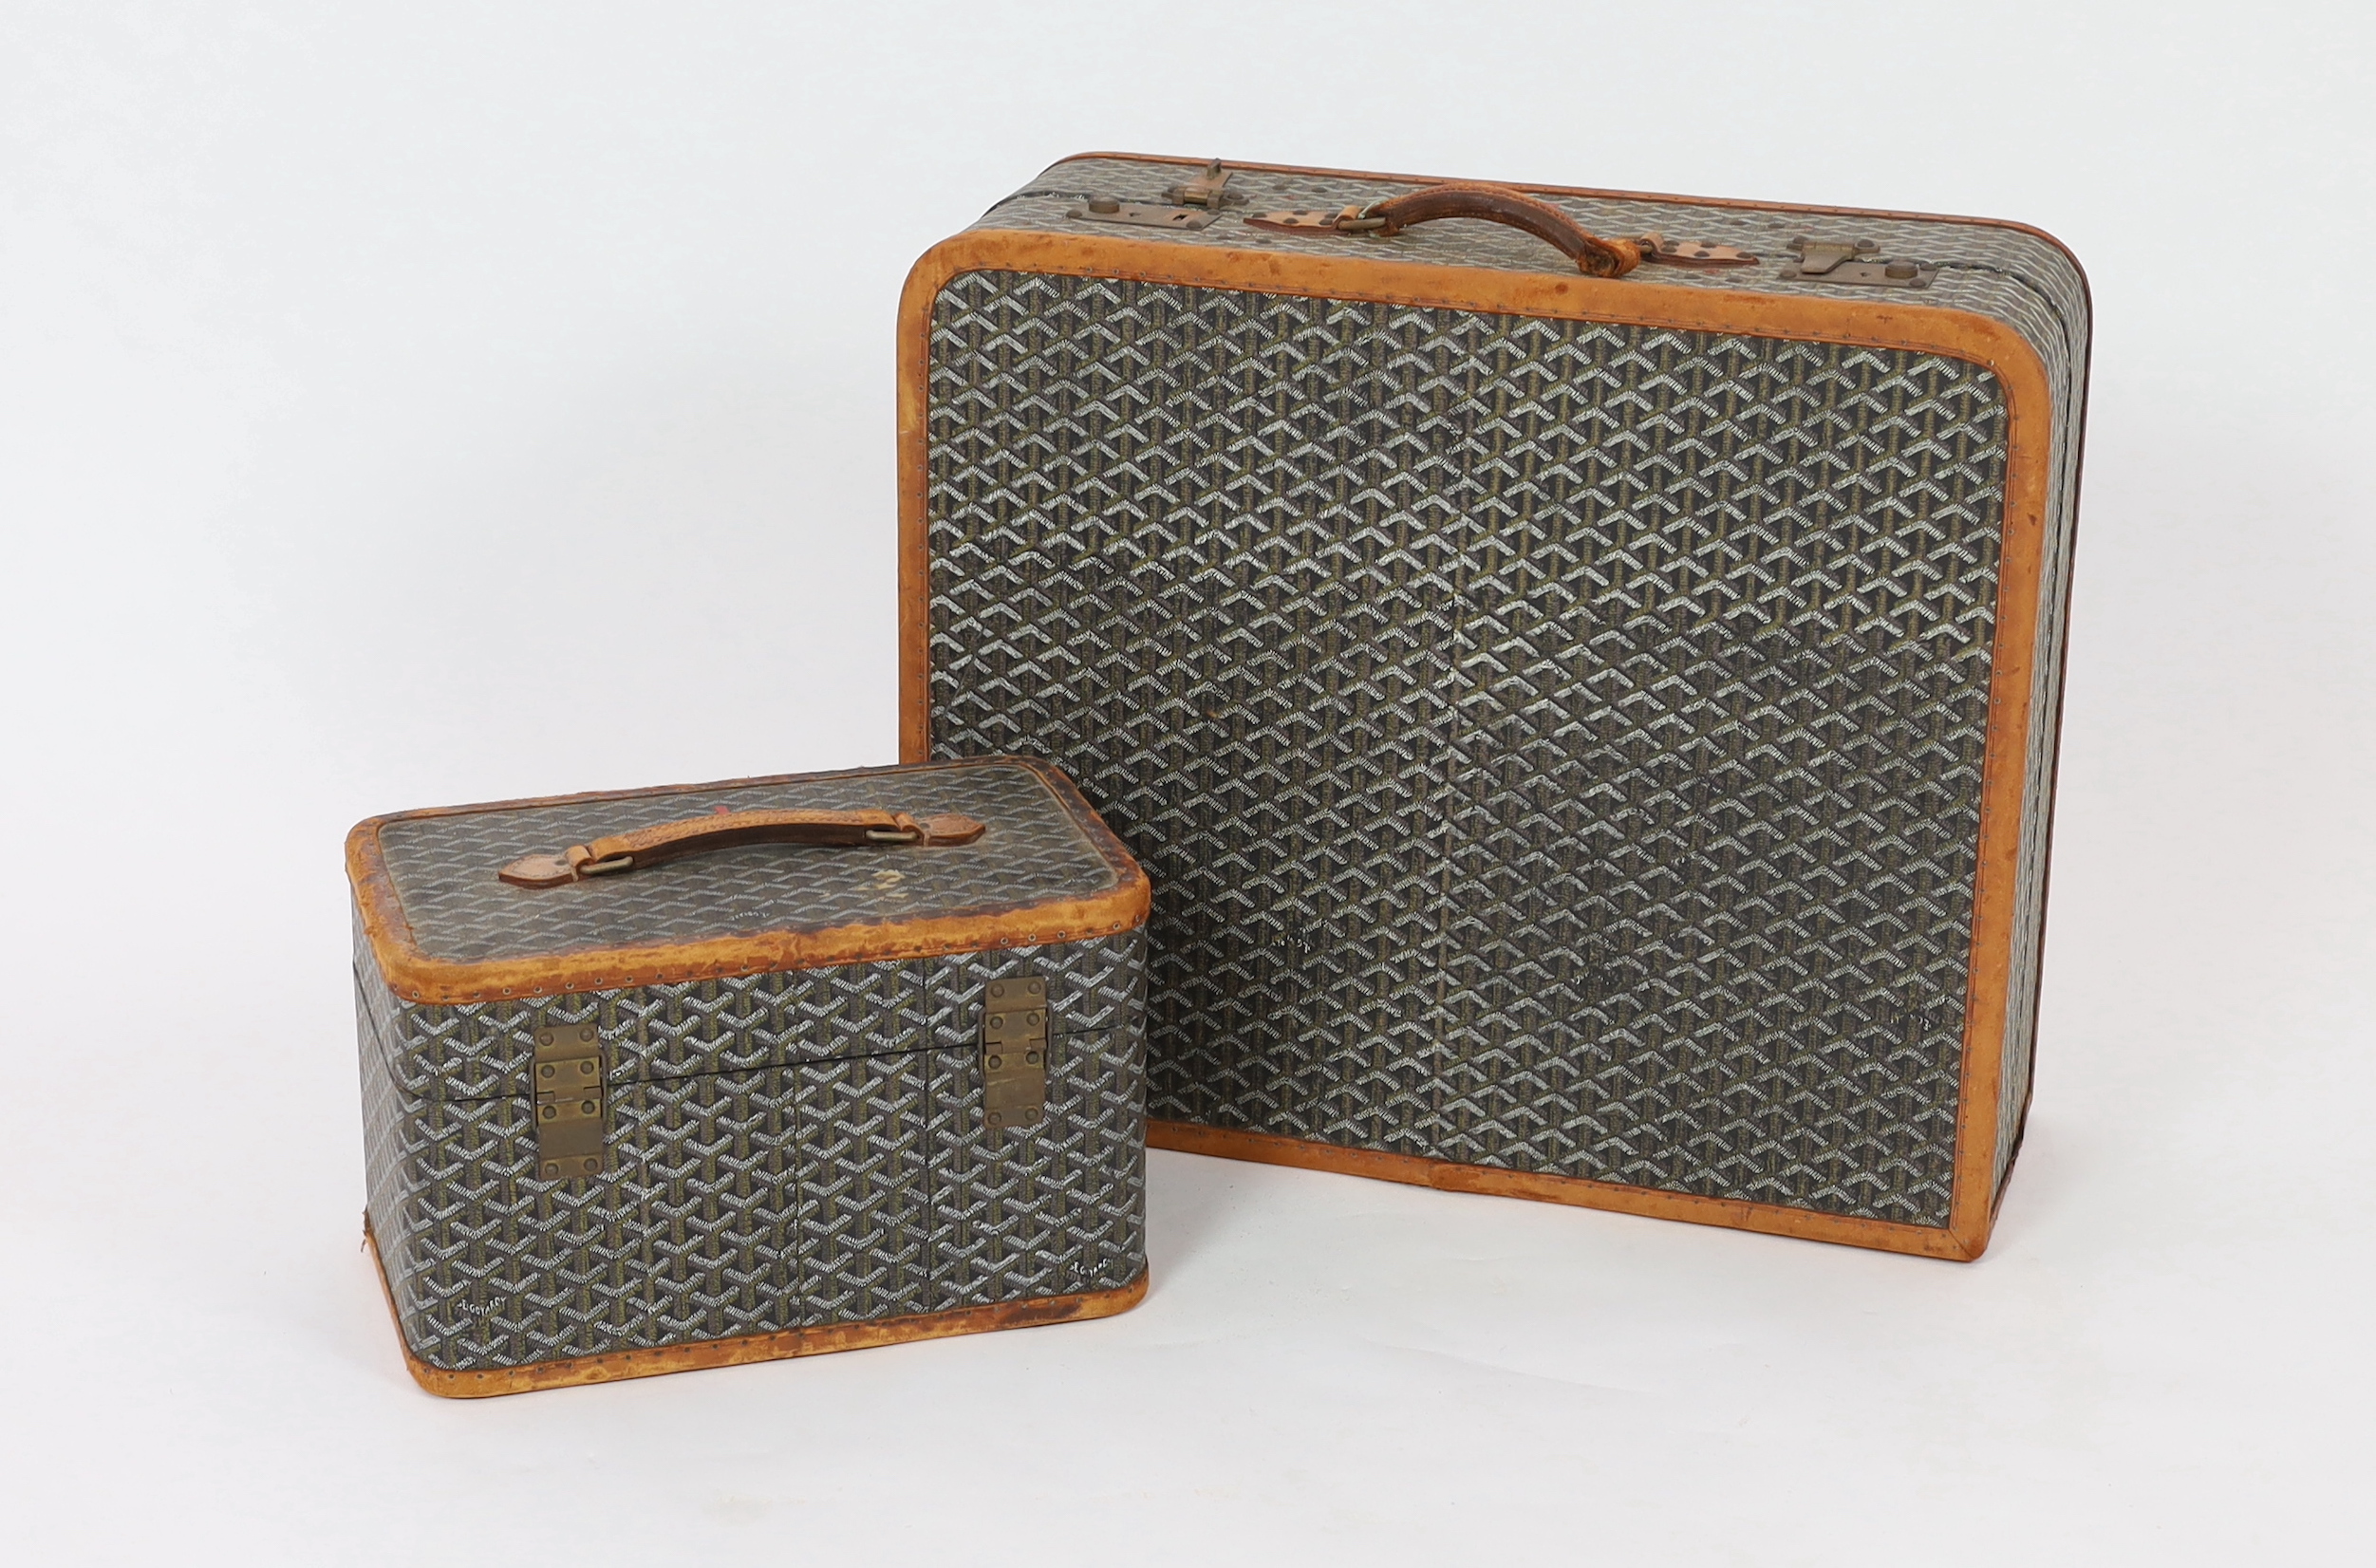 A 1940's Goyard vanity case with matching suitcase, vanity case 37cm wide, 23cm deep, 23cm high; suitcase 59cm wide, 21cm deep, 50cm high